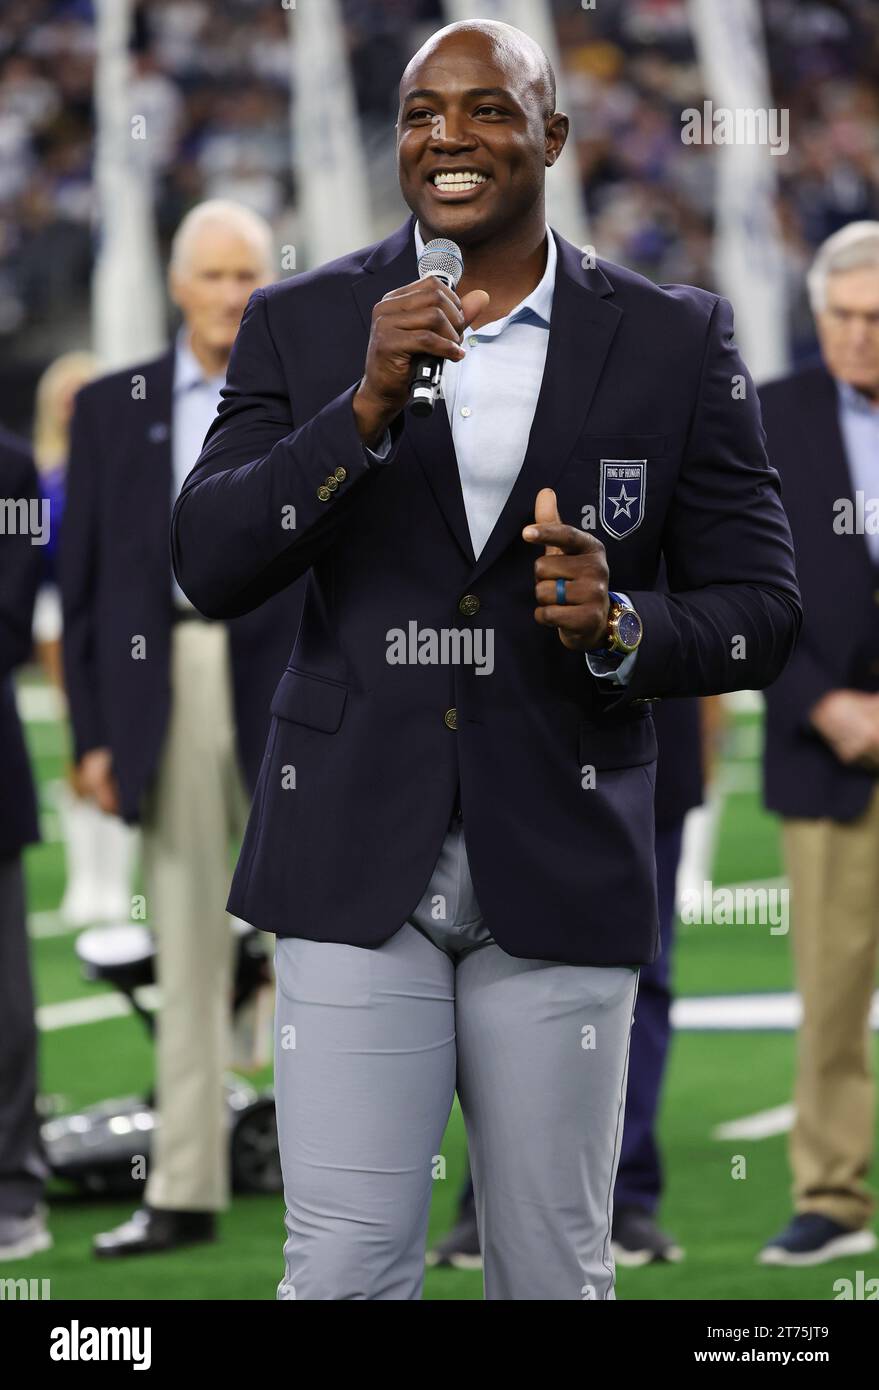 Arlington,TX USA: Former Dallas Cowboys player and newly ring of honor recipient, DaMarcus Ware talks during his induction at halftime of an NFL game Stock Photo